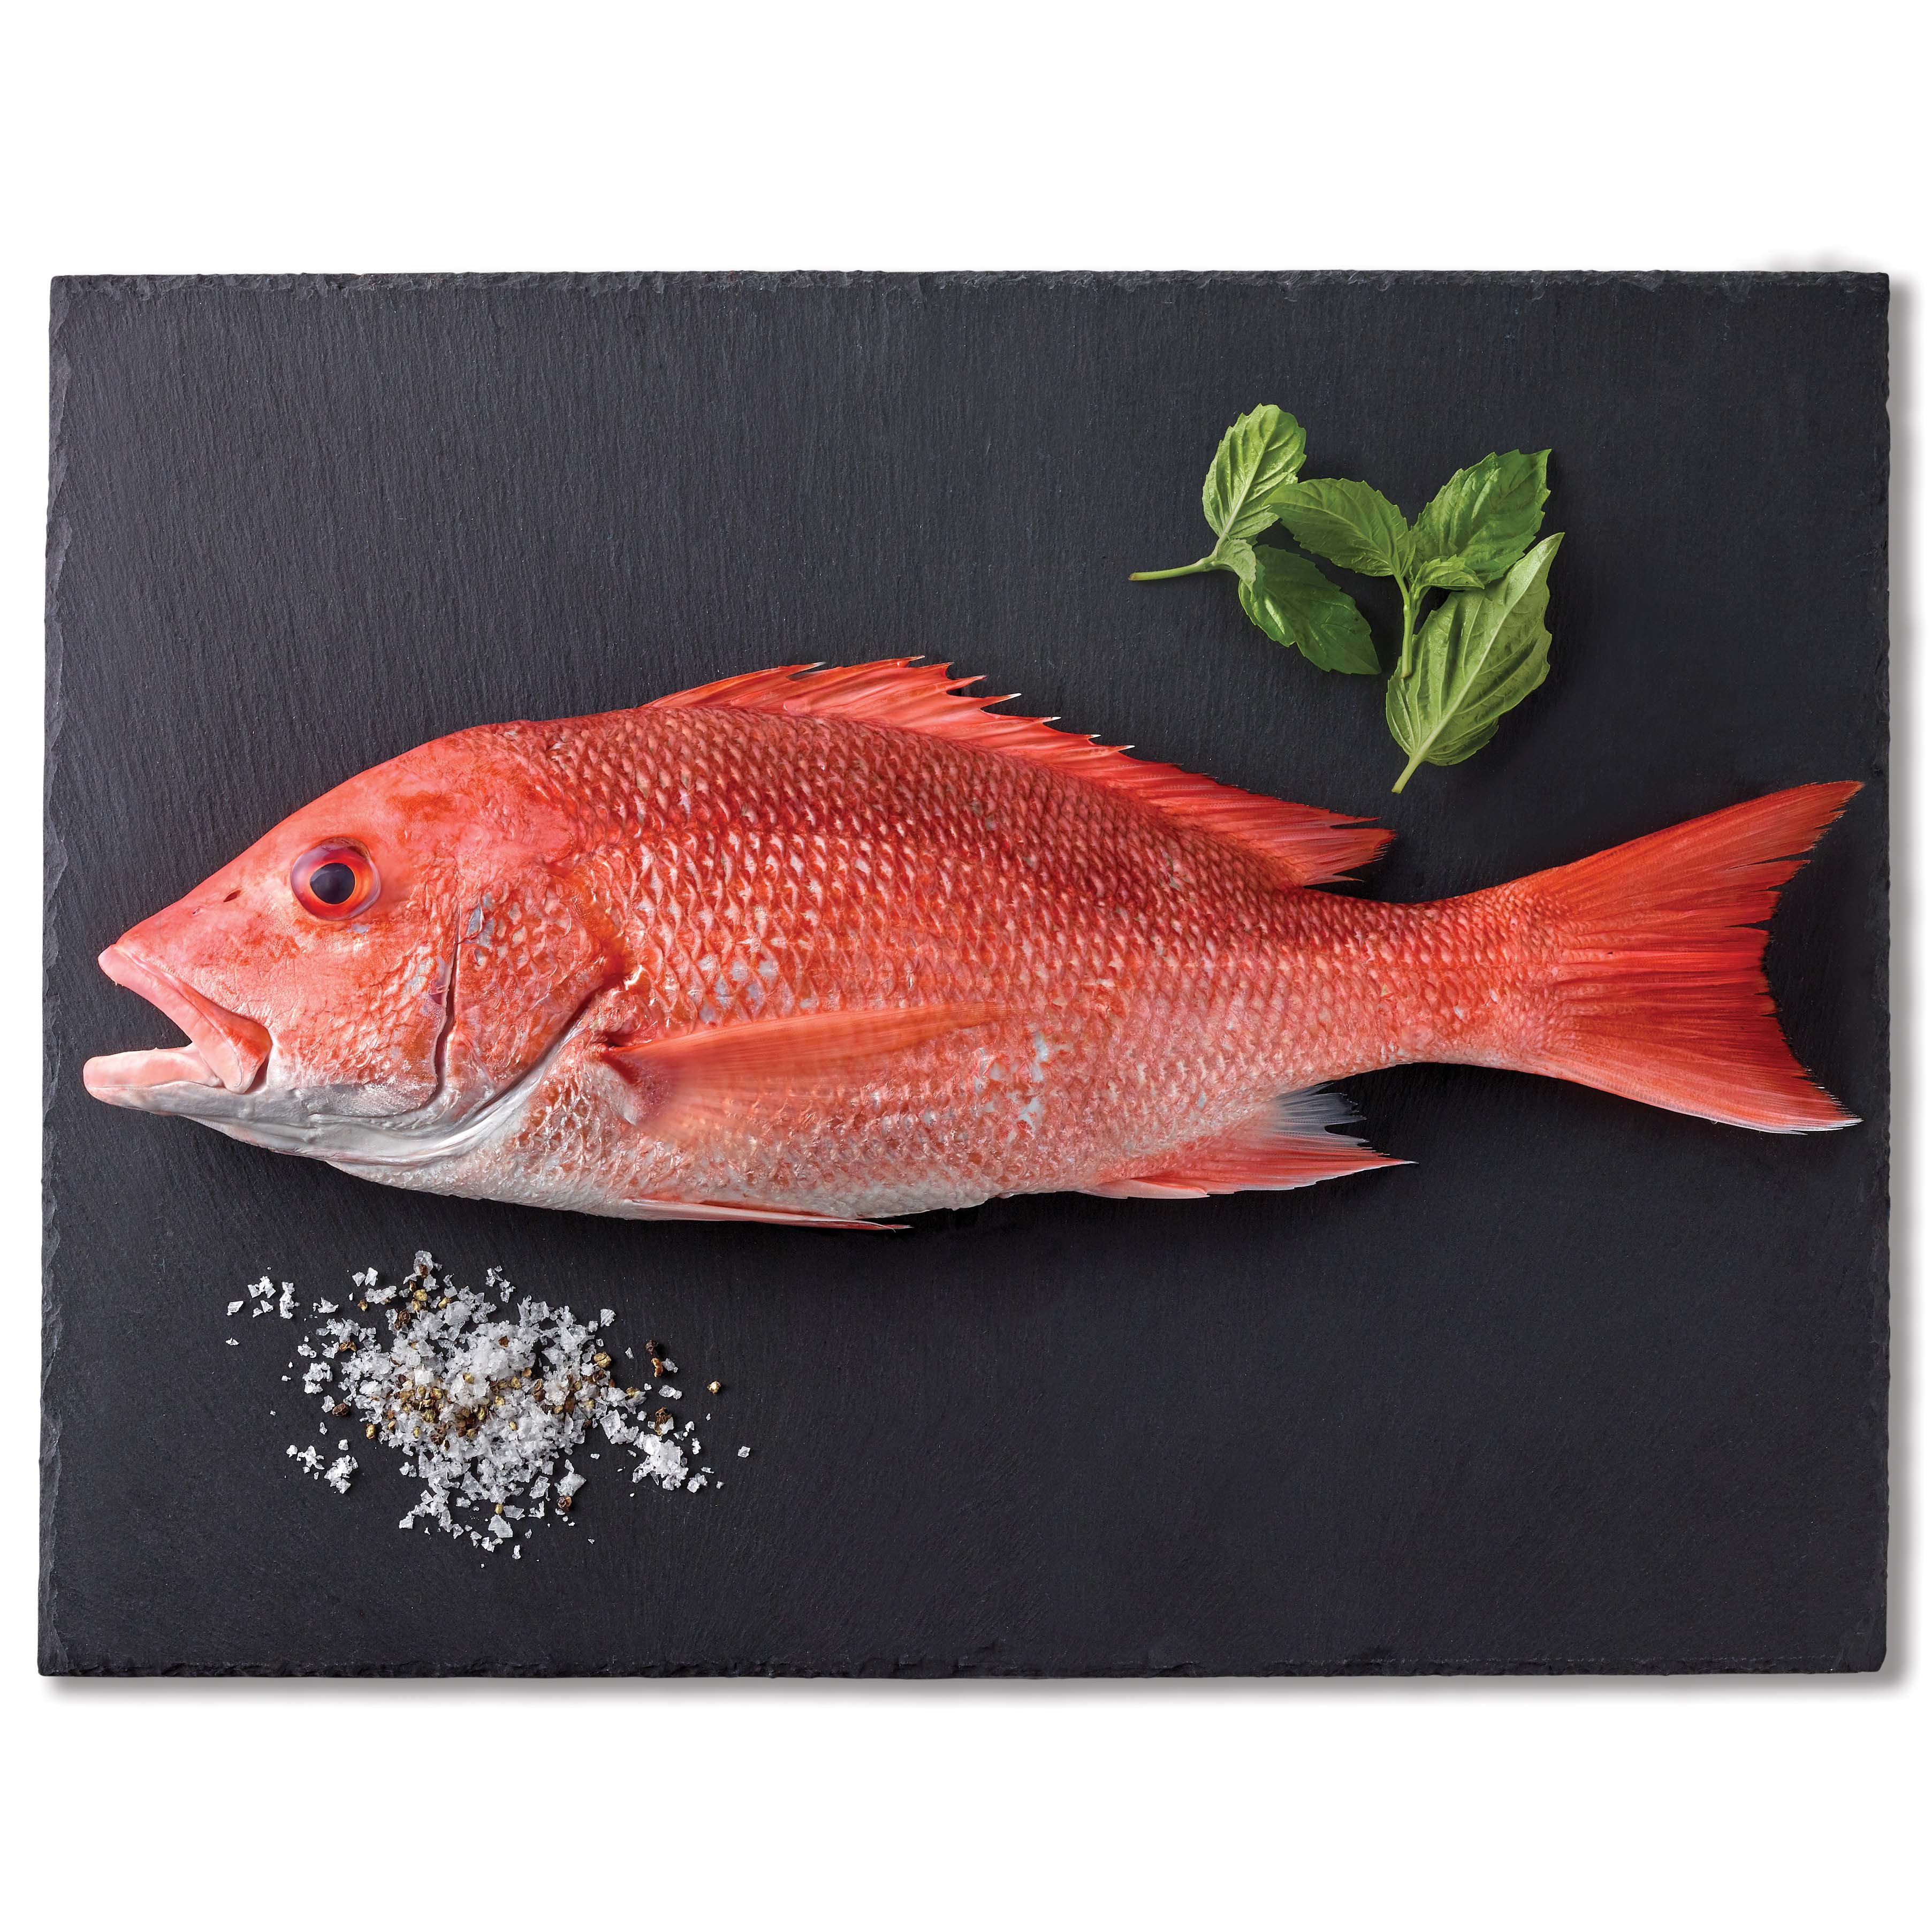 Top 98+ Images what does a red snapper fish look like Latest